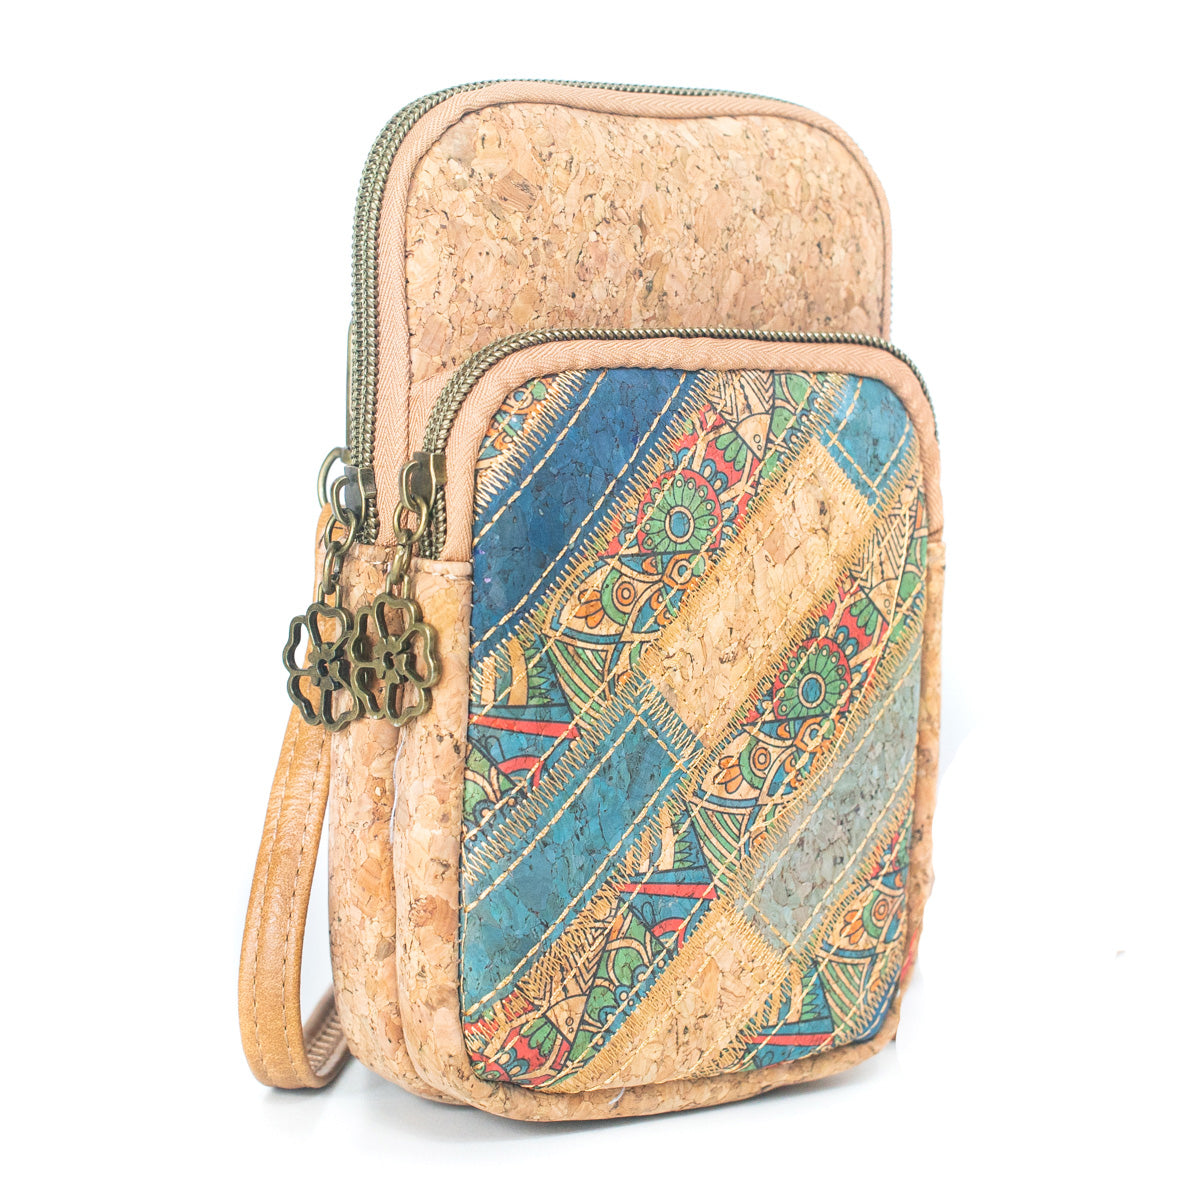 Natural Cork Patchwork Embellished Vegan Phone Pouch | THE CORK COLLECTION